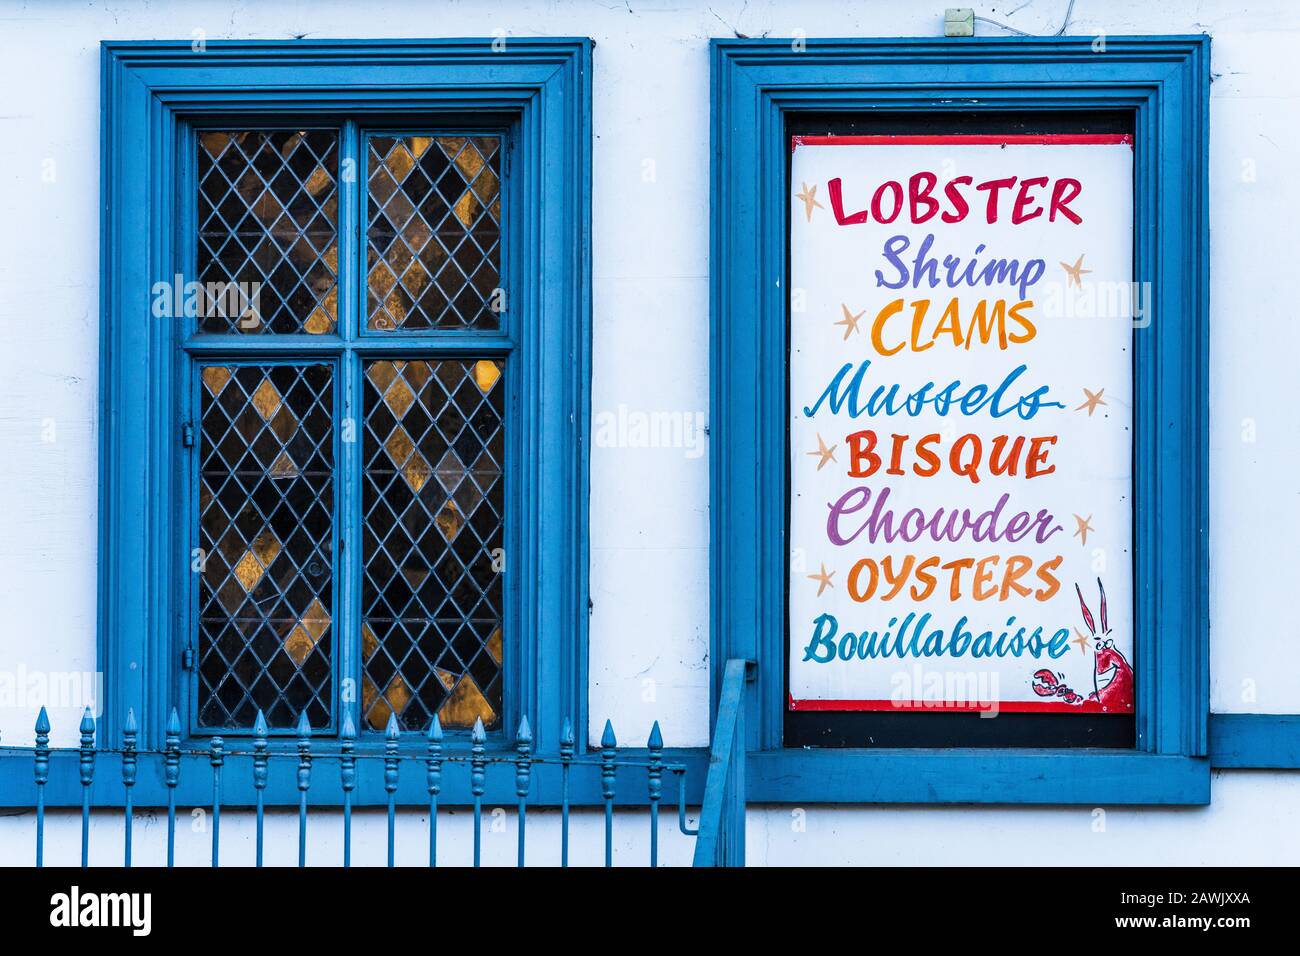 Seafood Restaurant Sign - advertising Lobster Shrimp Clams Mussels Bisque Chowder Oysters Bouillabaisse Stock Photo